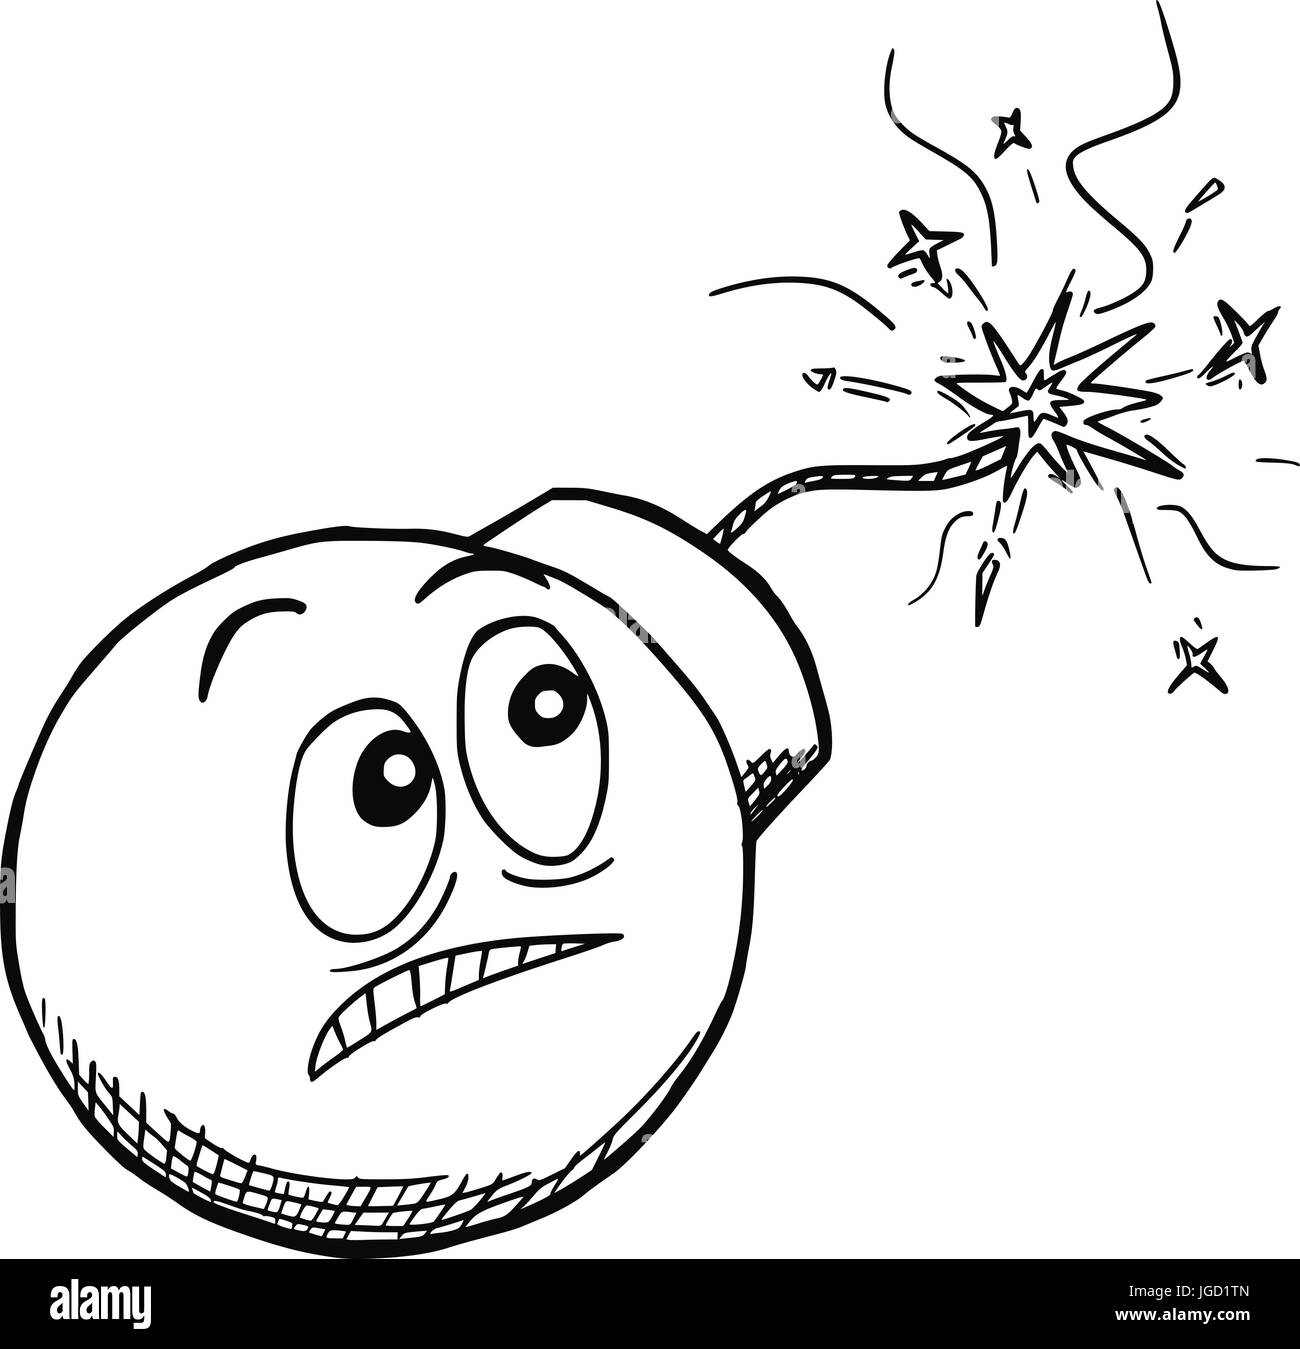 Cartoon vector of scared bomb watching its safety fuse burning Stock Vector